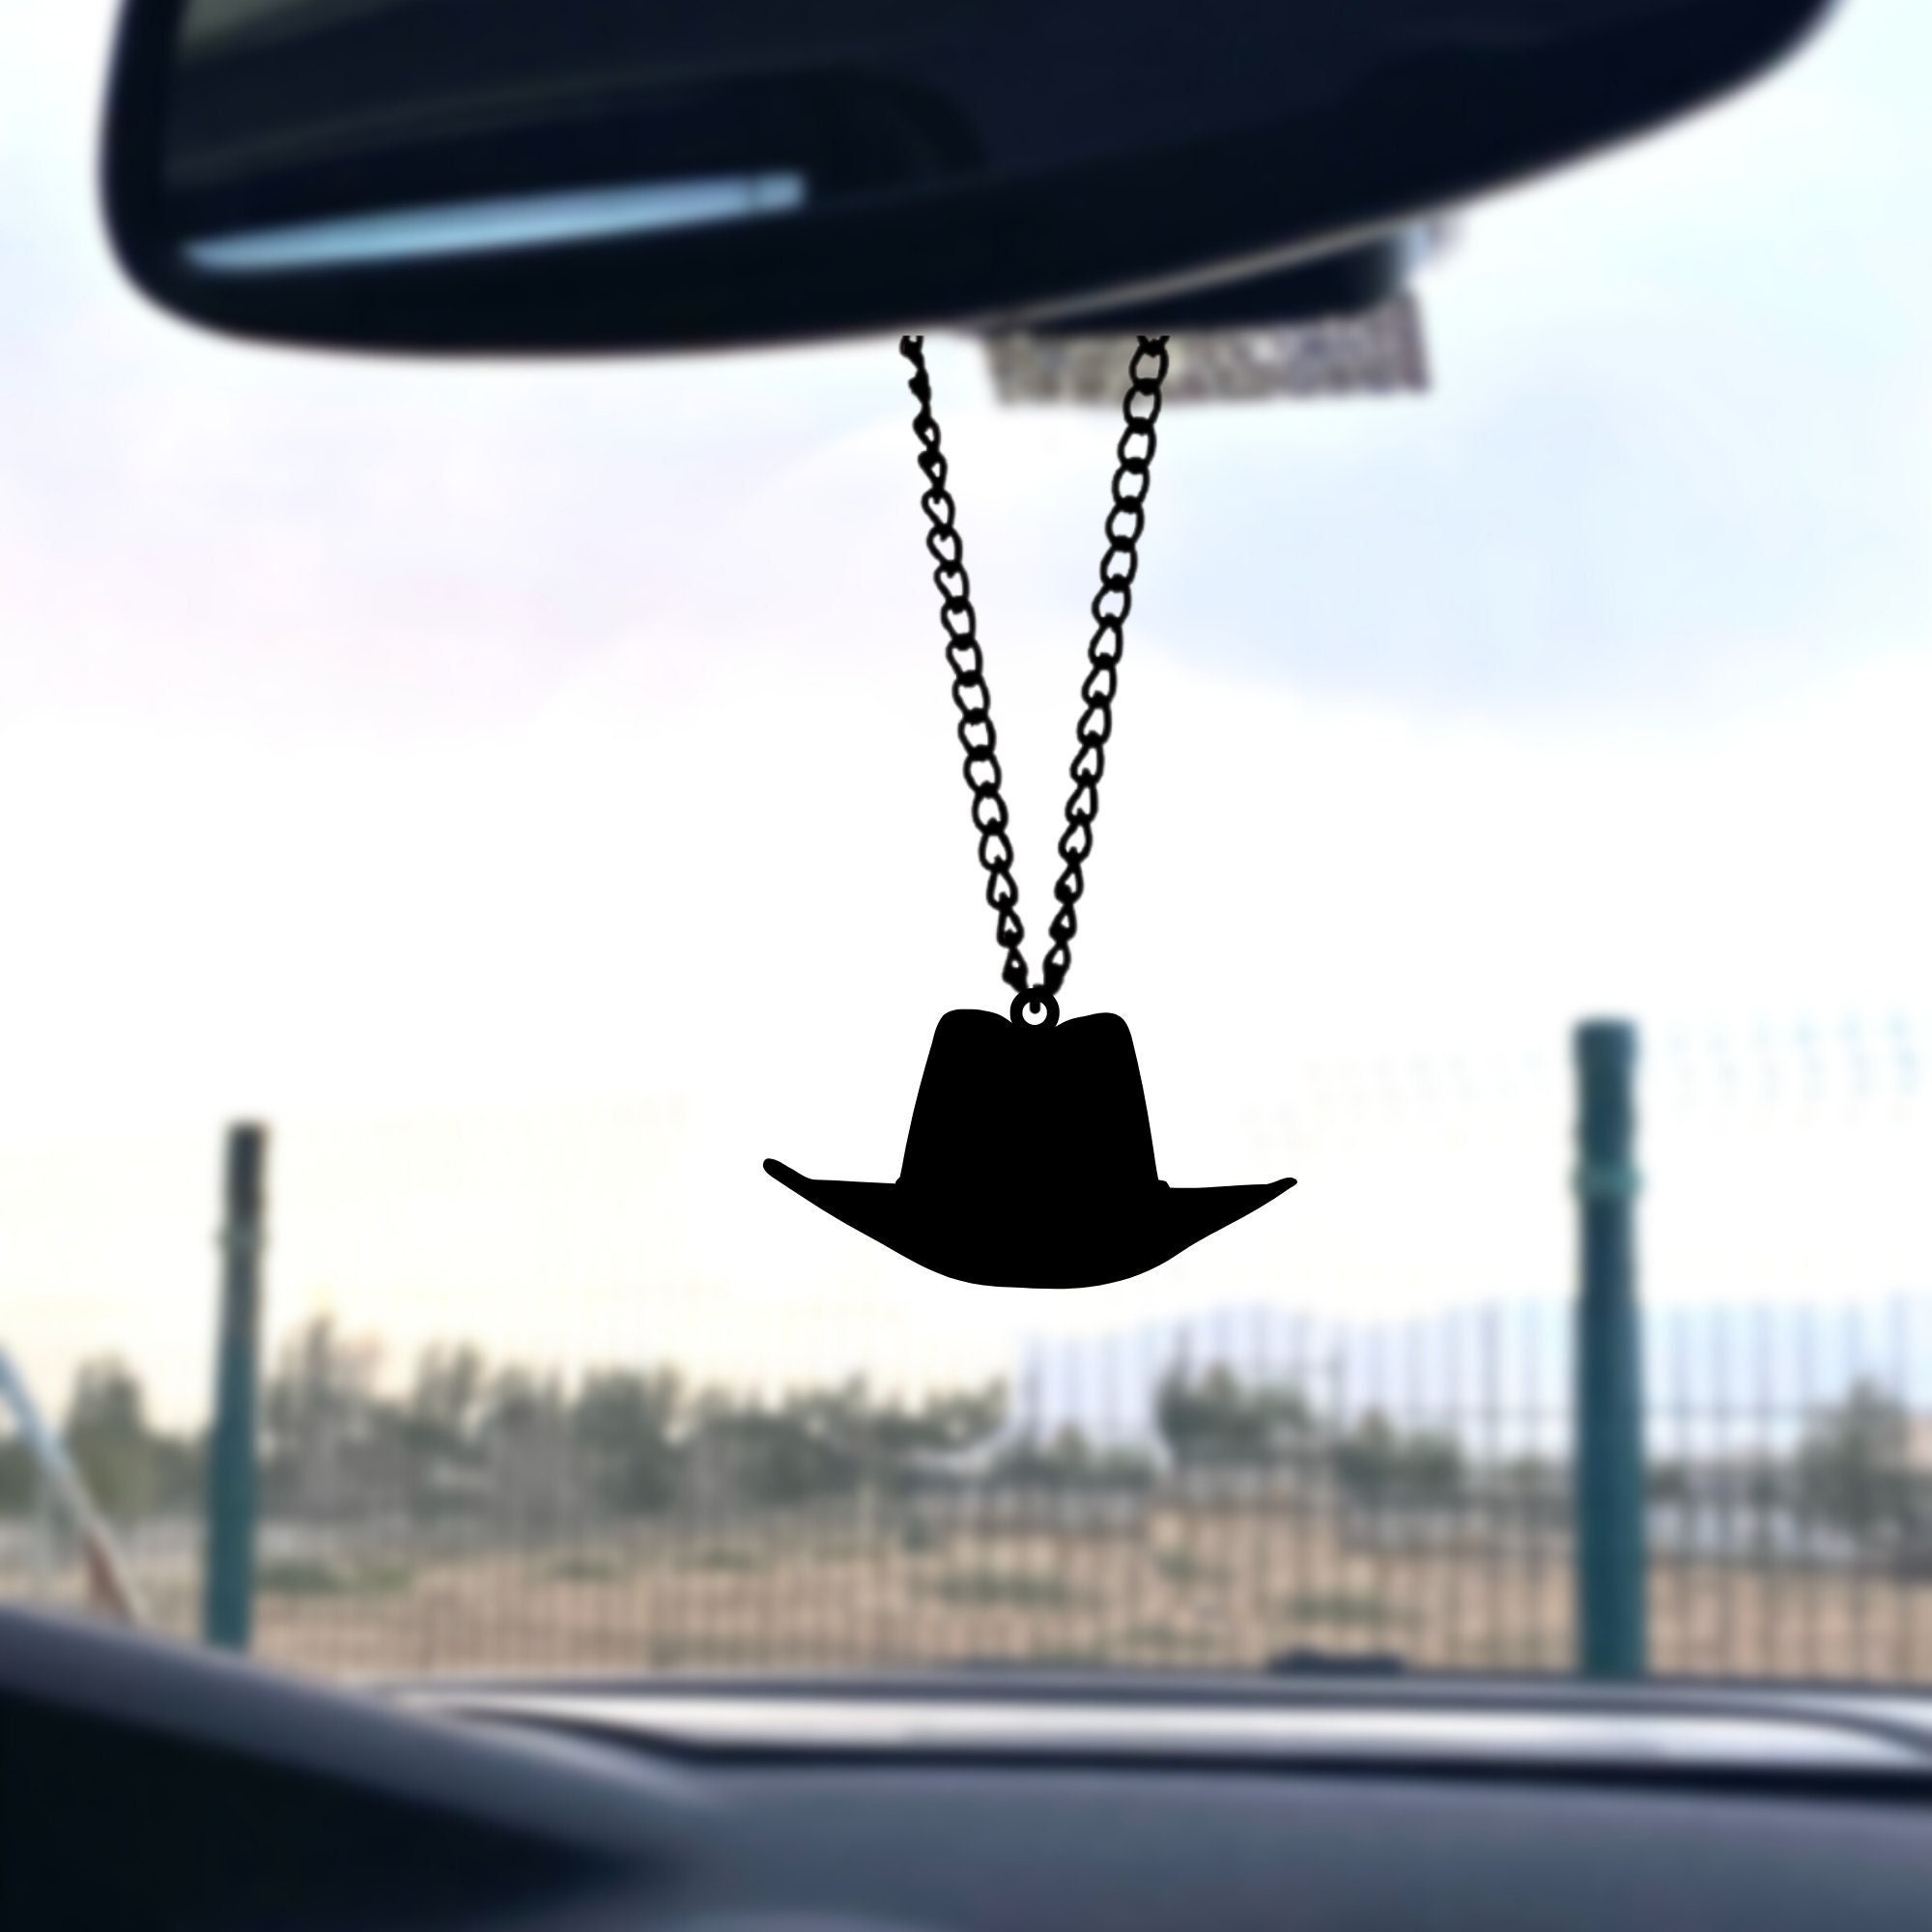 Dongzhur Western Cowboy Cowgirl Personalized Name Car Rear View Mirror Accessories Car Ornament Hanging Charm Interior Rearview Pendant Decor (4 in), Brown